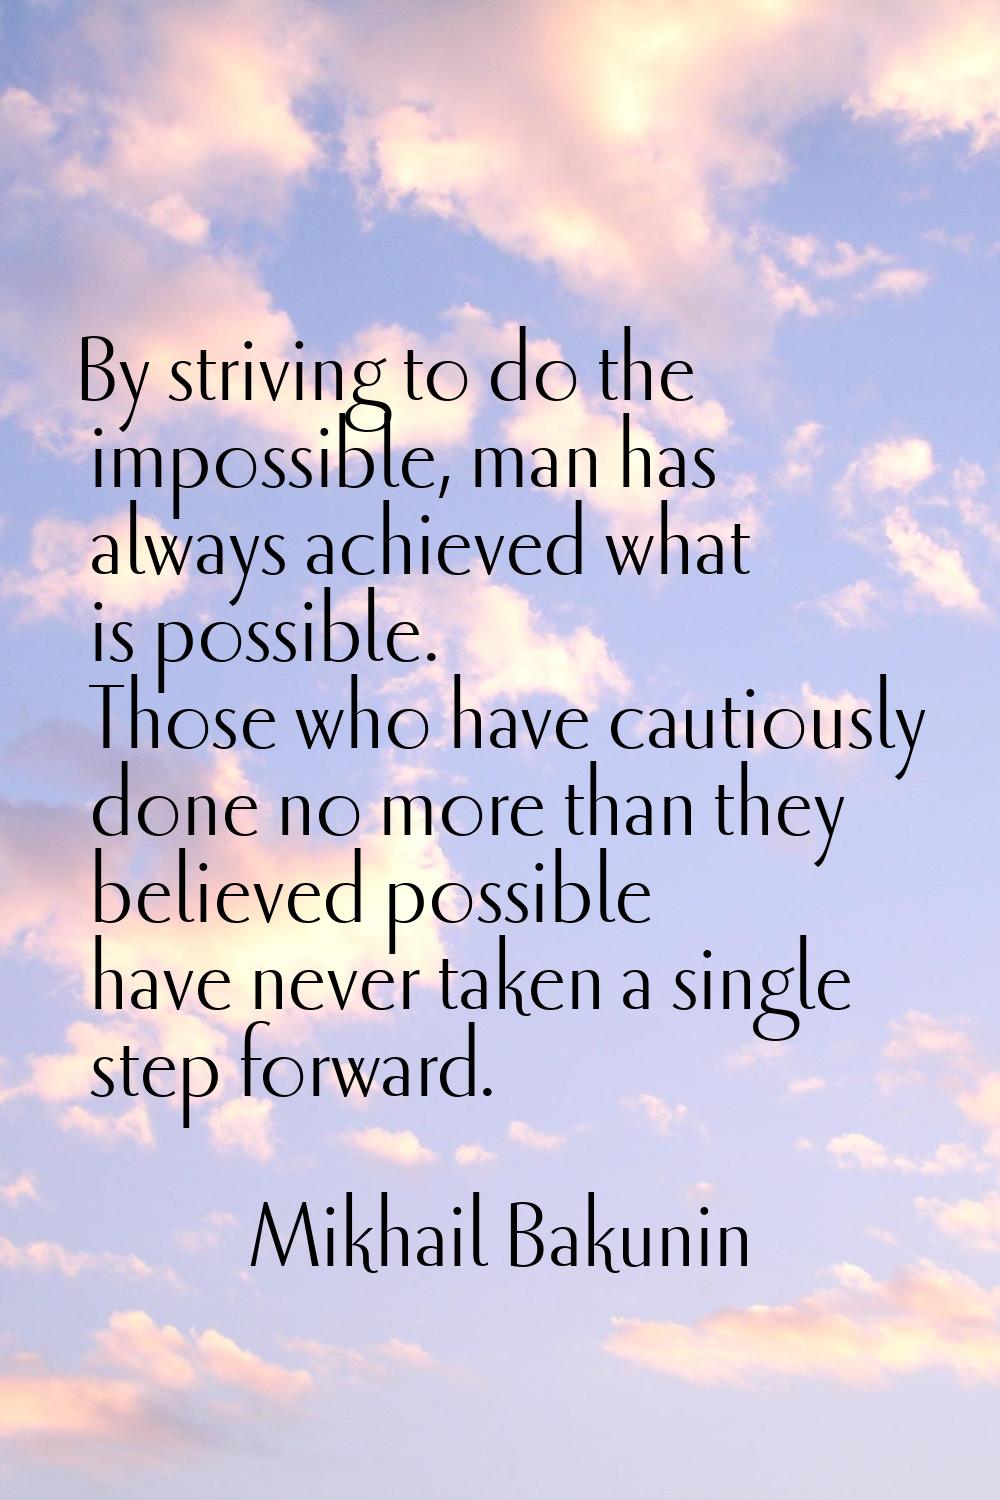 By striving to do the impossible, man has always achieved what is possible. Those who have cautious